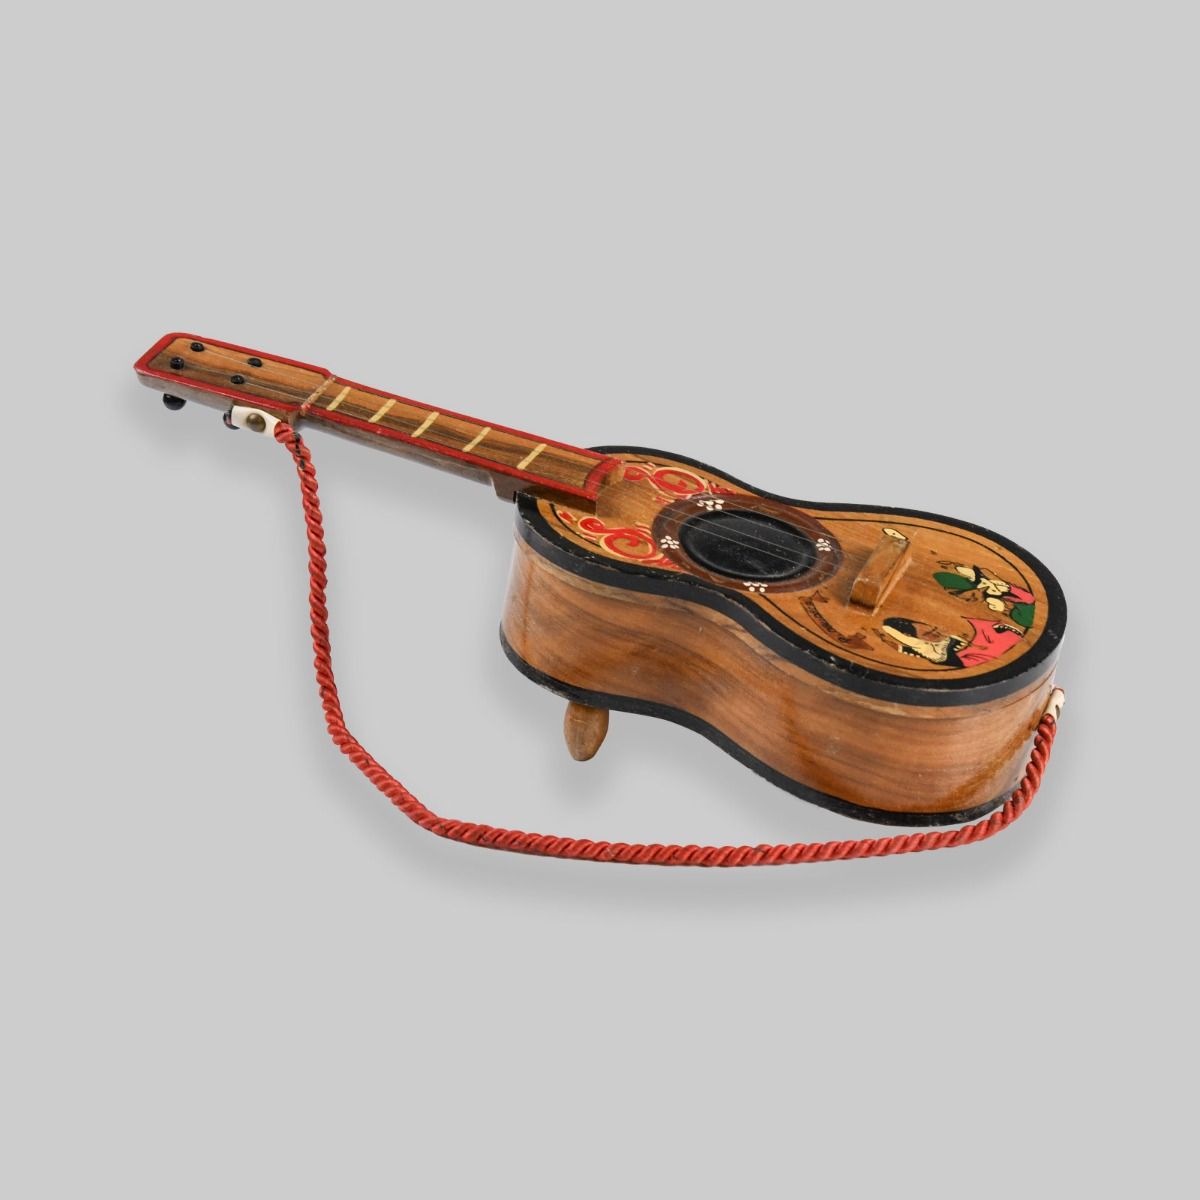 Vintage Wooden Guitar Shaped Music Box